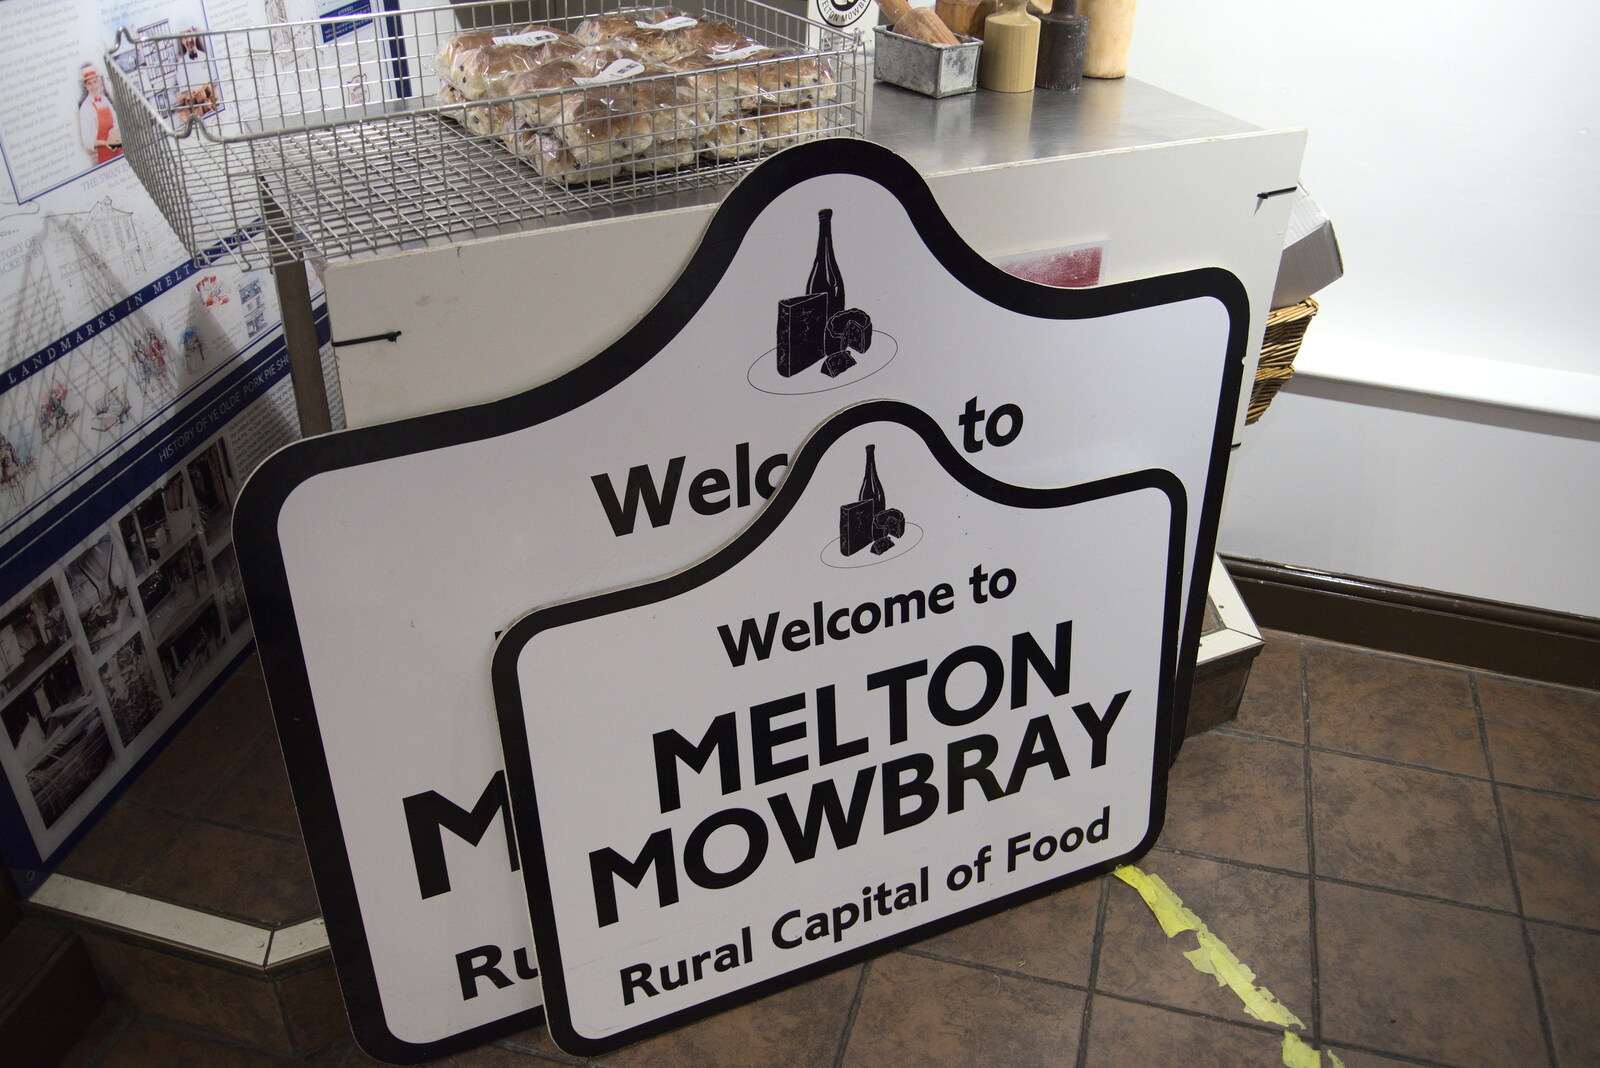 Melton Mowbray: rural capital of food from Pork Pies and Dockside Dereliction, Melton Mowbray and Liverpool - 7th August 2021